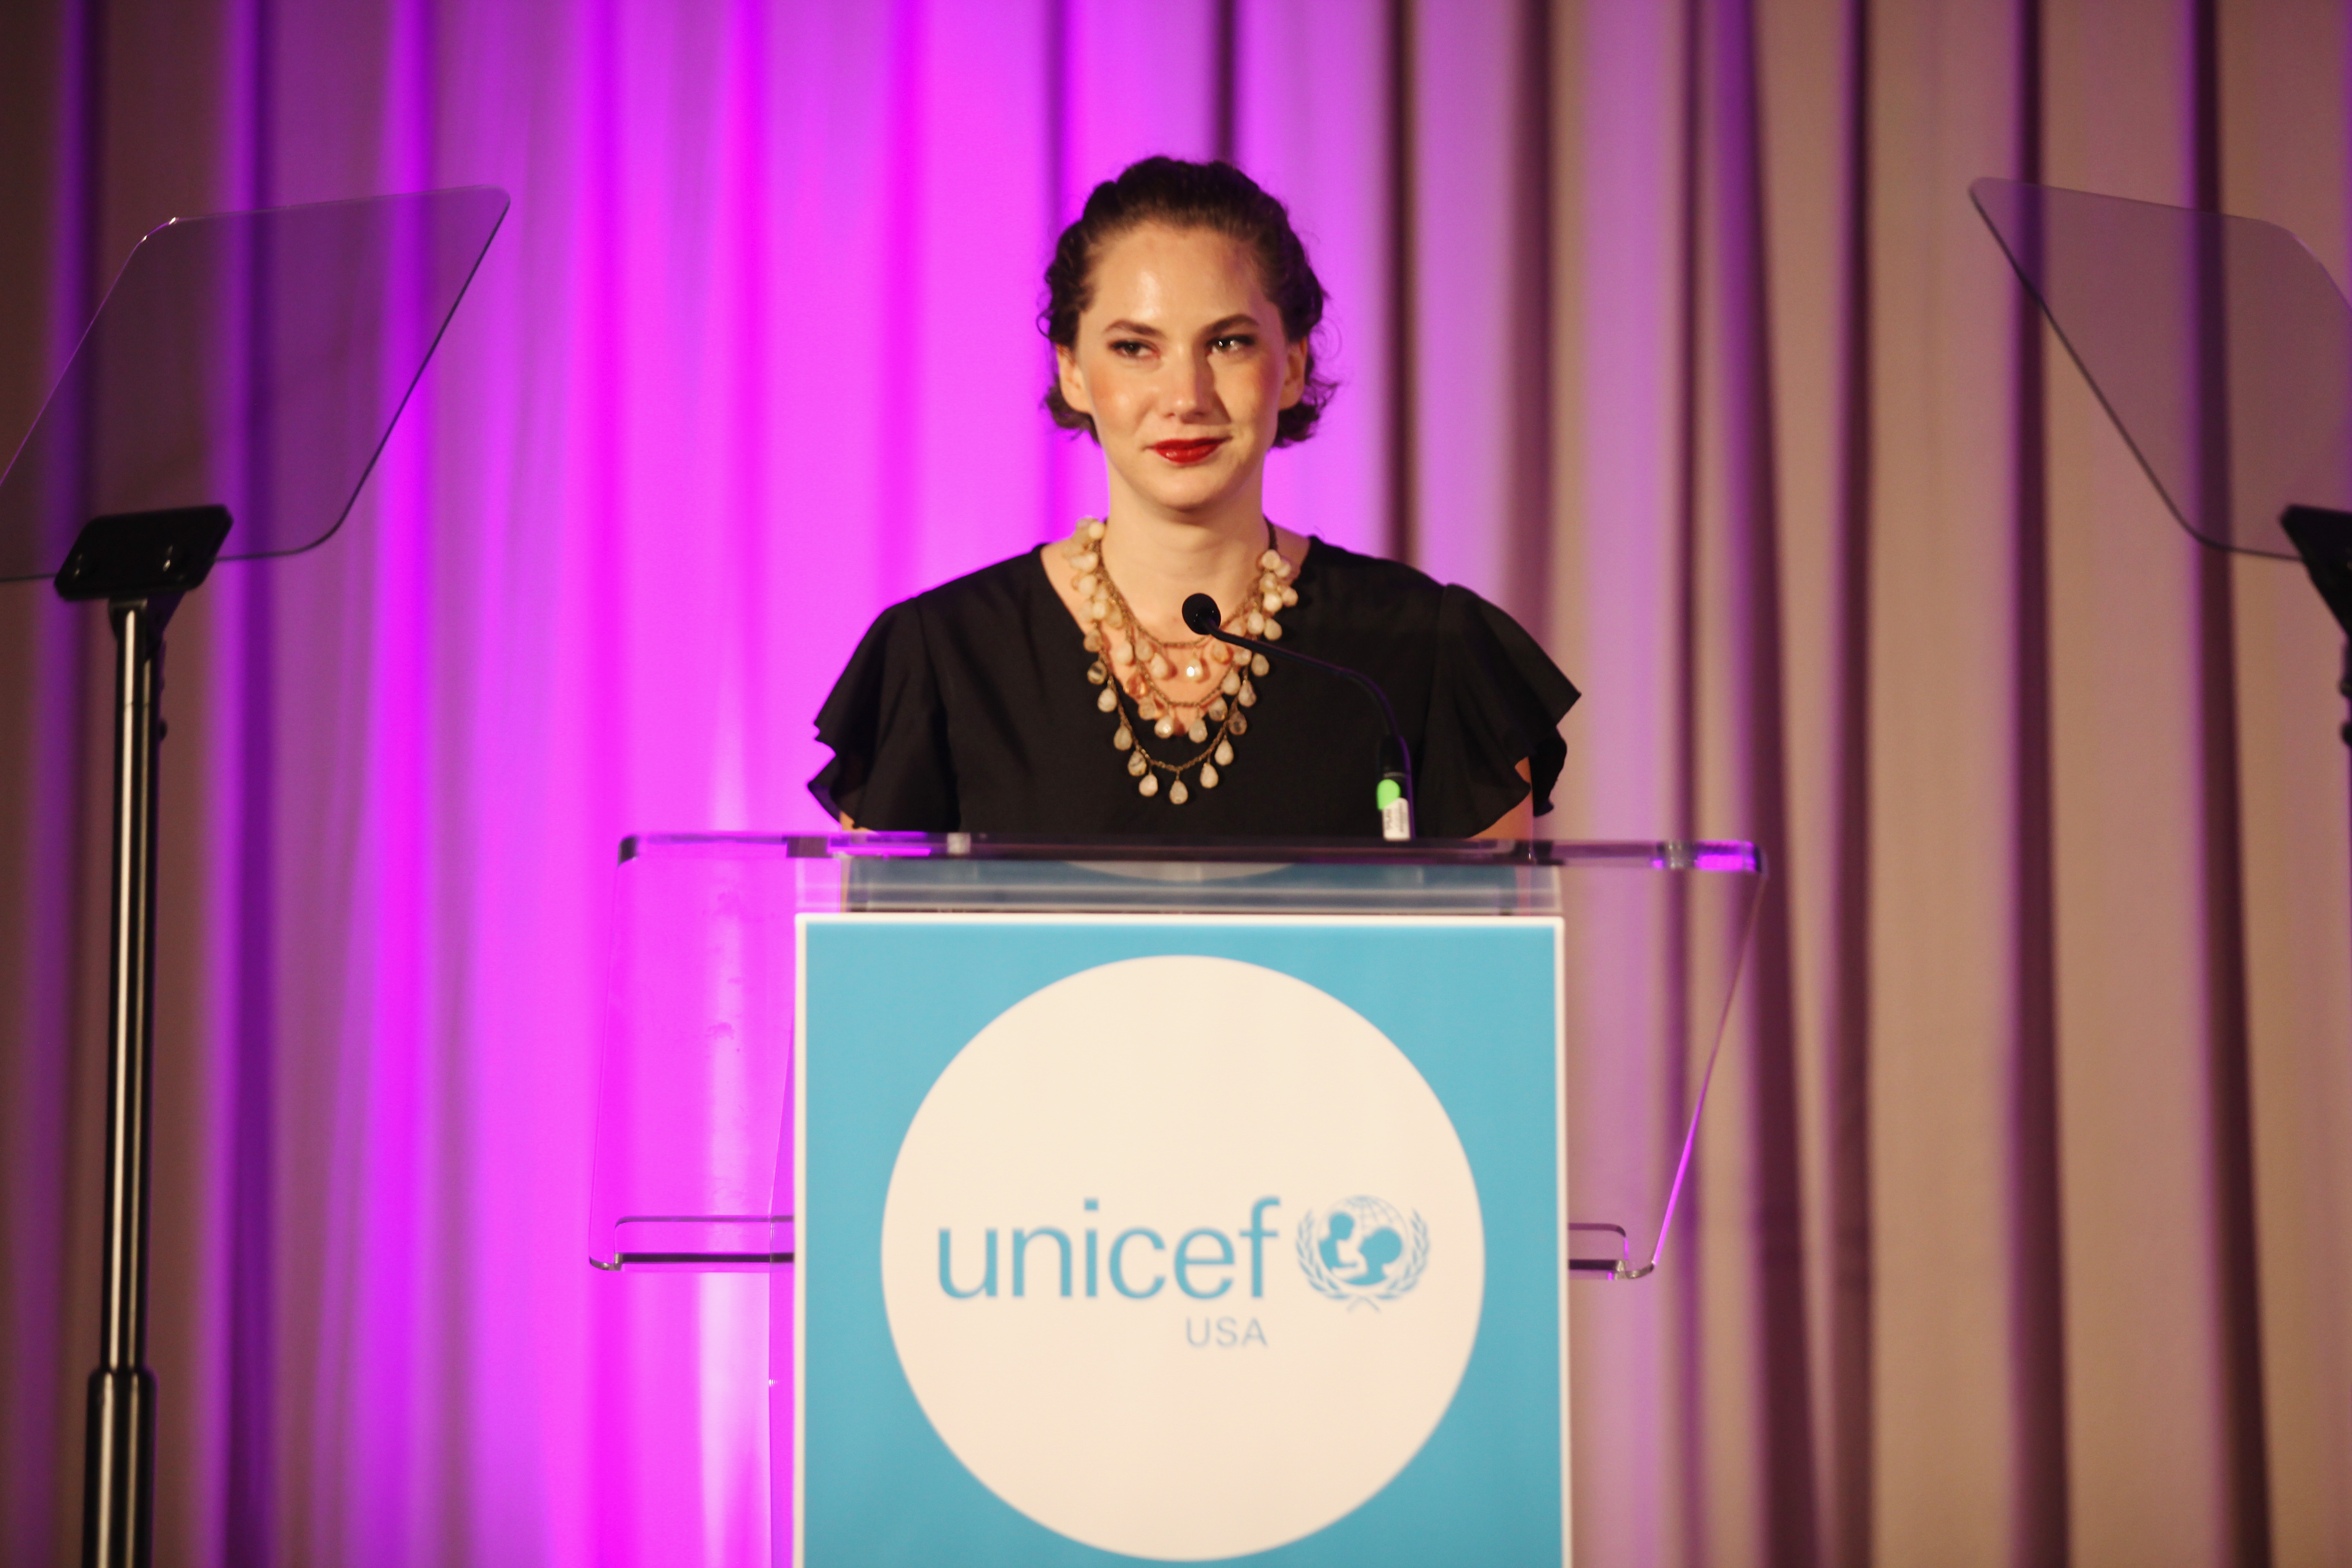 Emma Kathleen Hepburn Ferrer speaks at the Second Annual UNICEF Gala in San Francisco, California, on September 22, 2018 | Source: Getty Images